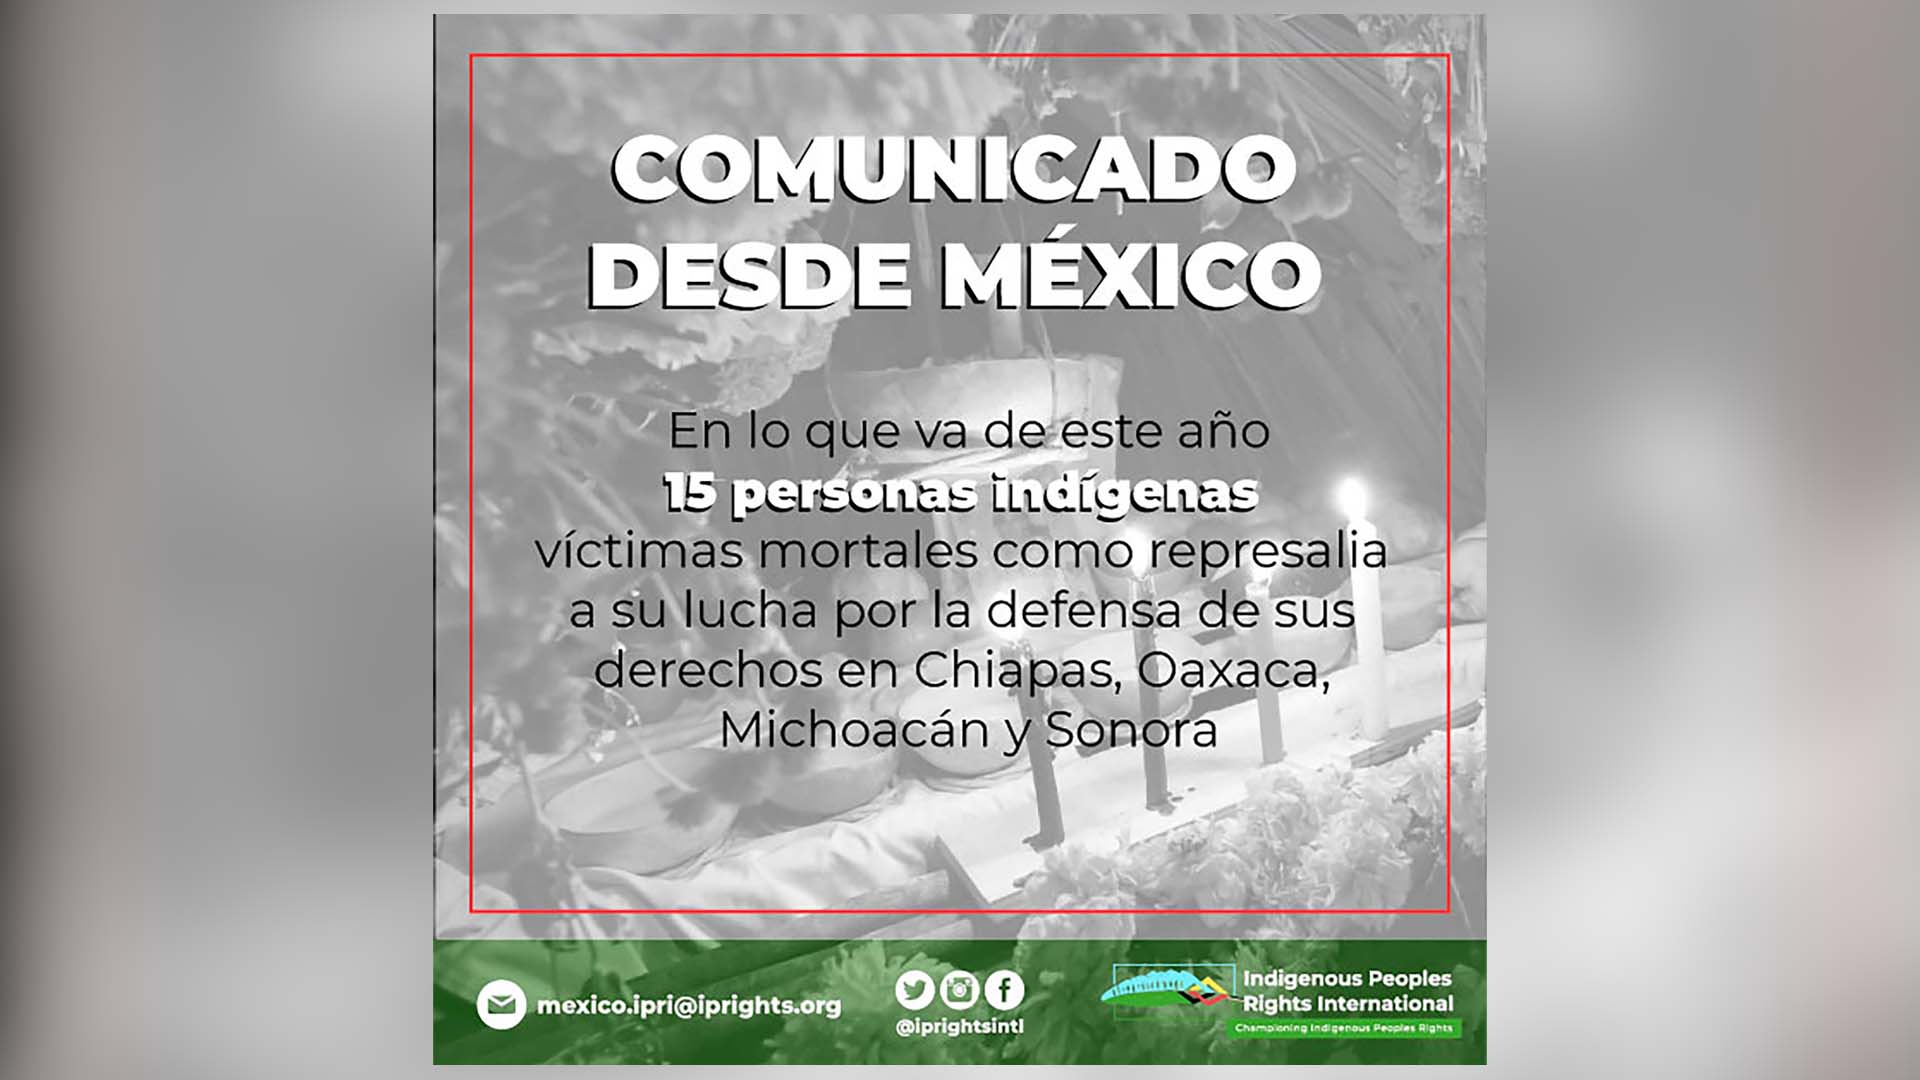 Statement Mexico: Indigenous Peoples Rights International